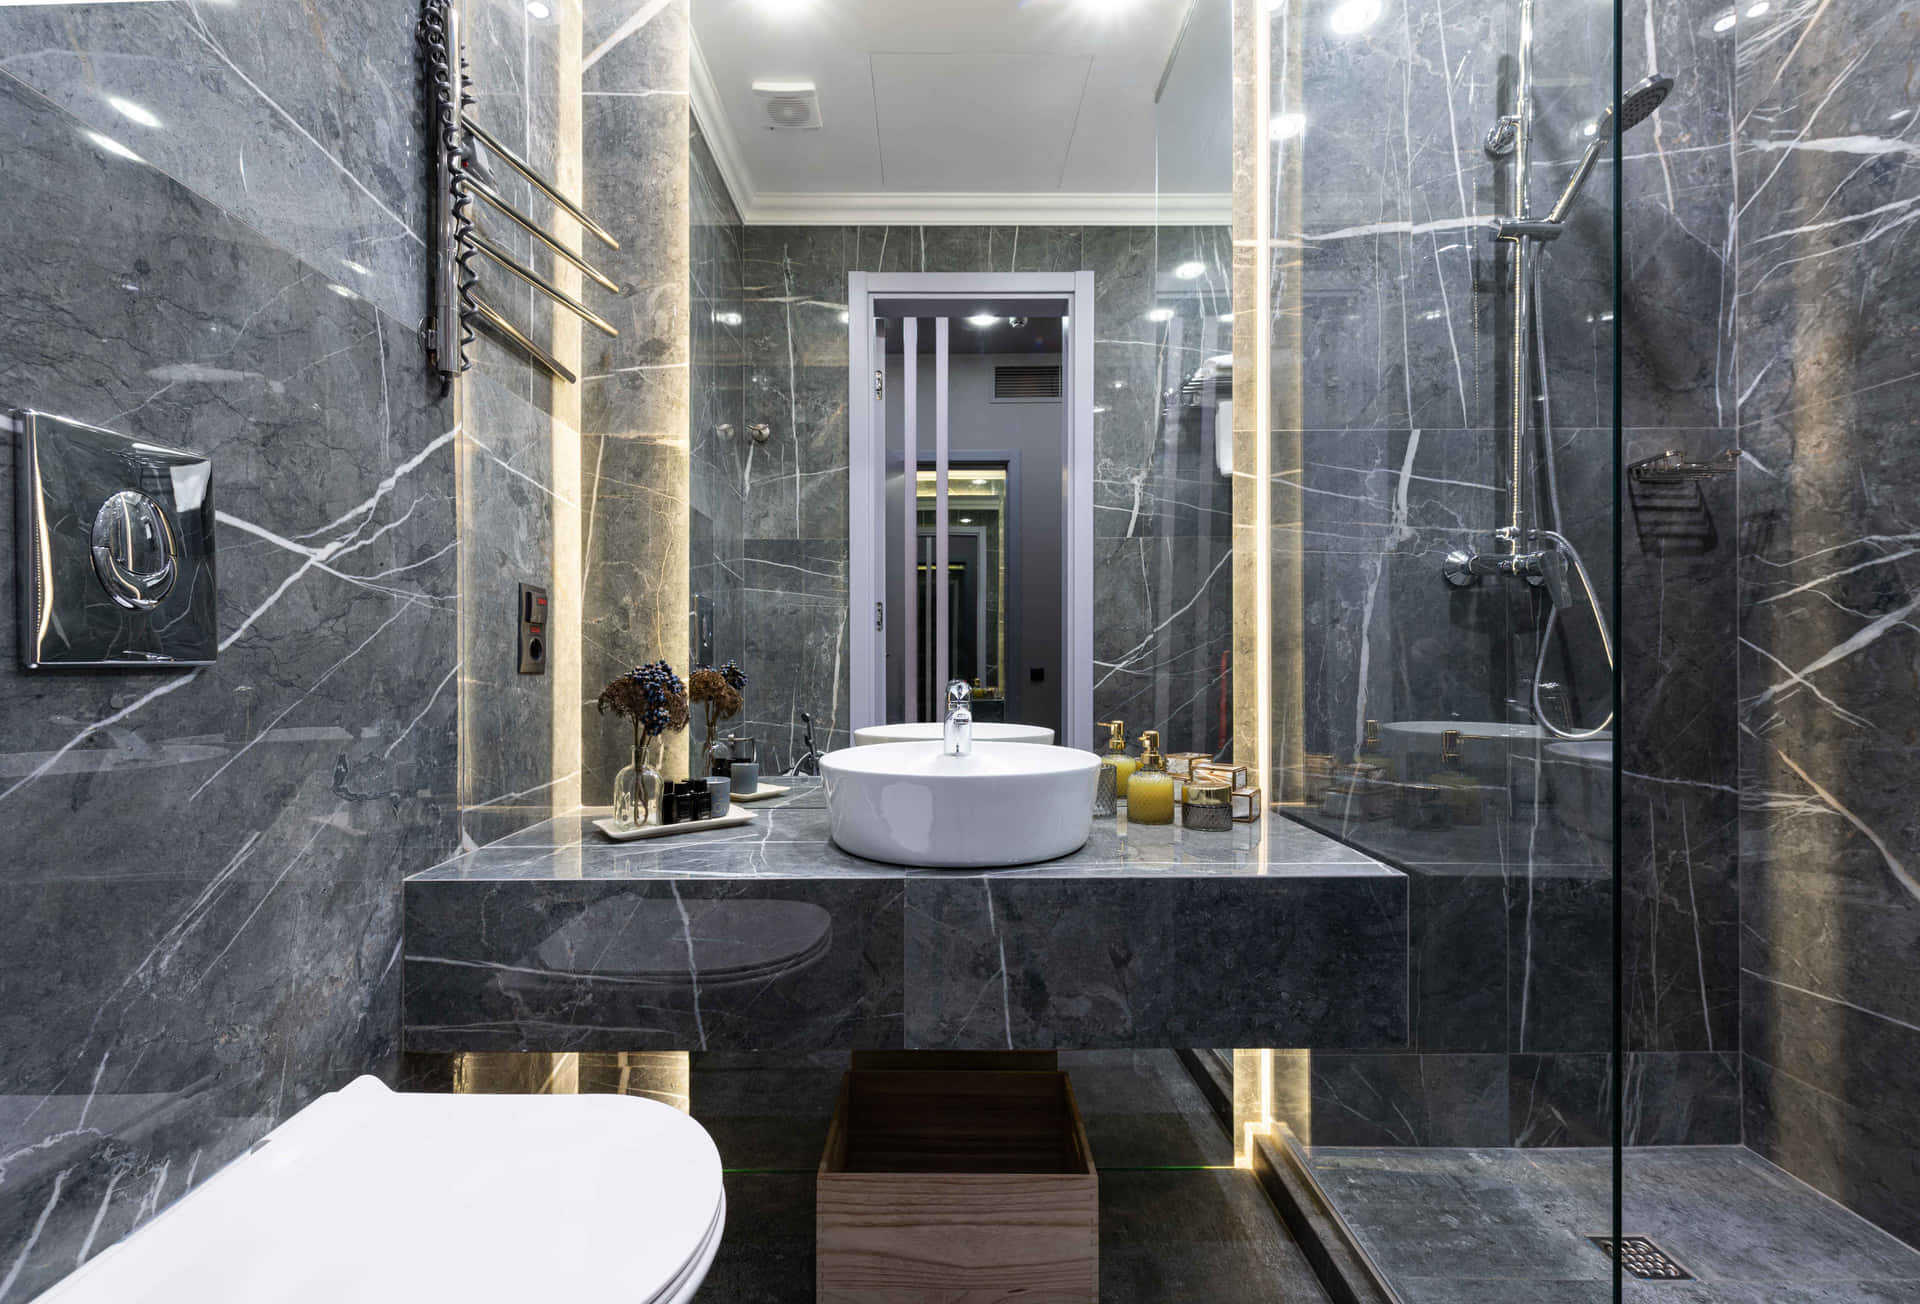 A minimalist black and white marble pattern for an elegant touch.